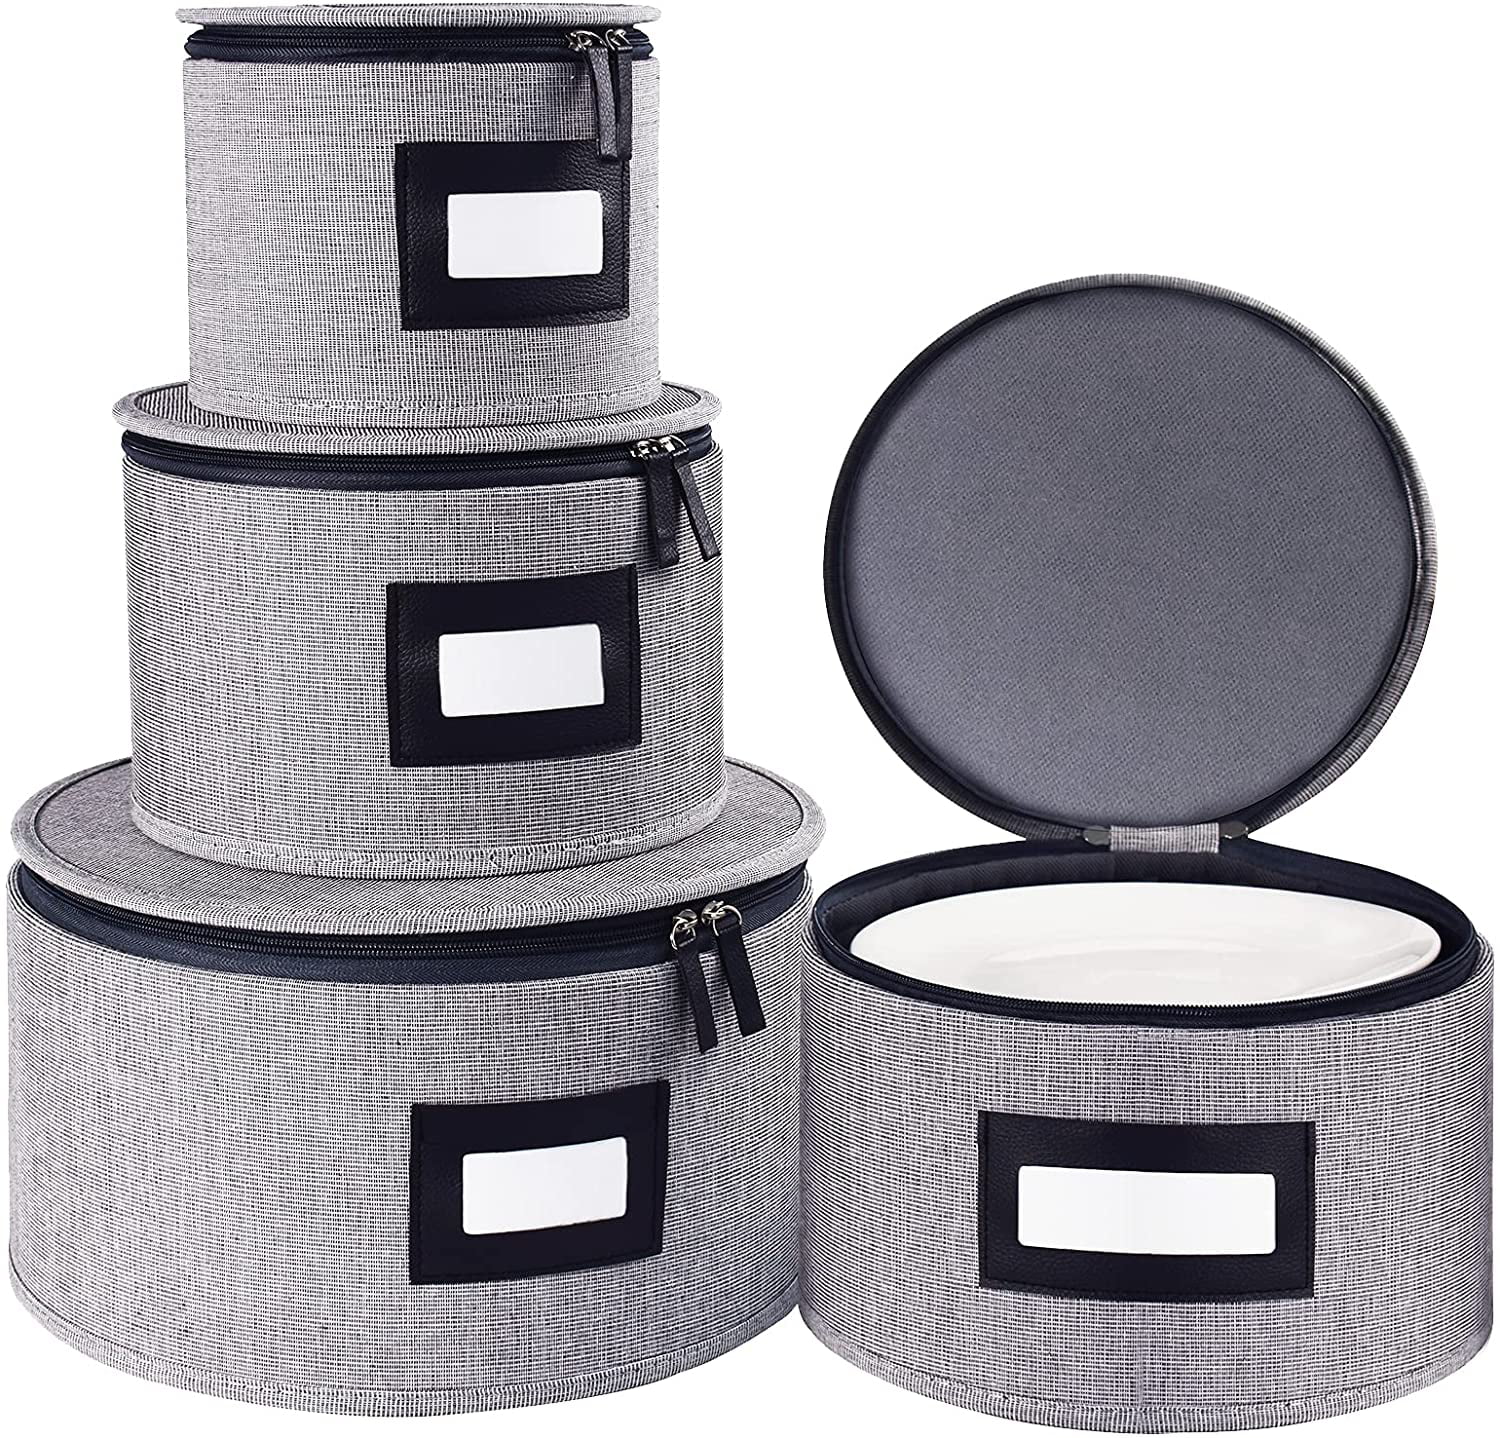 Storage Set for Dinnerware Storage and Transport Hard Shell and Stackable 